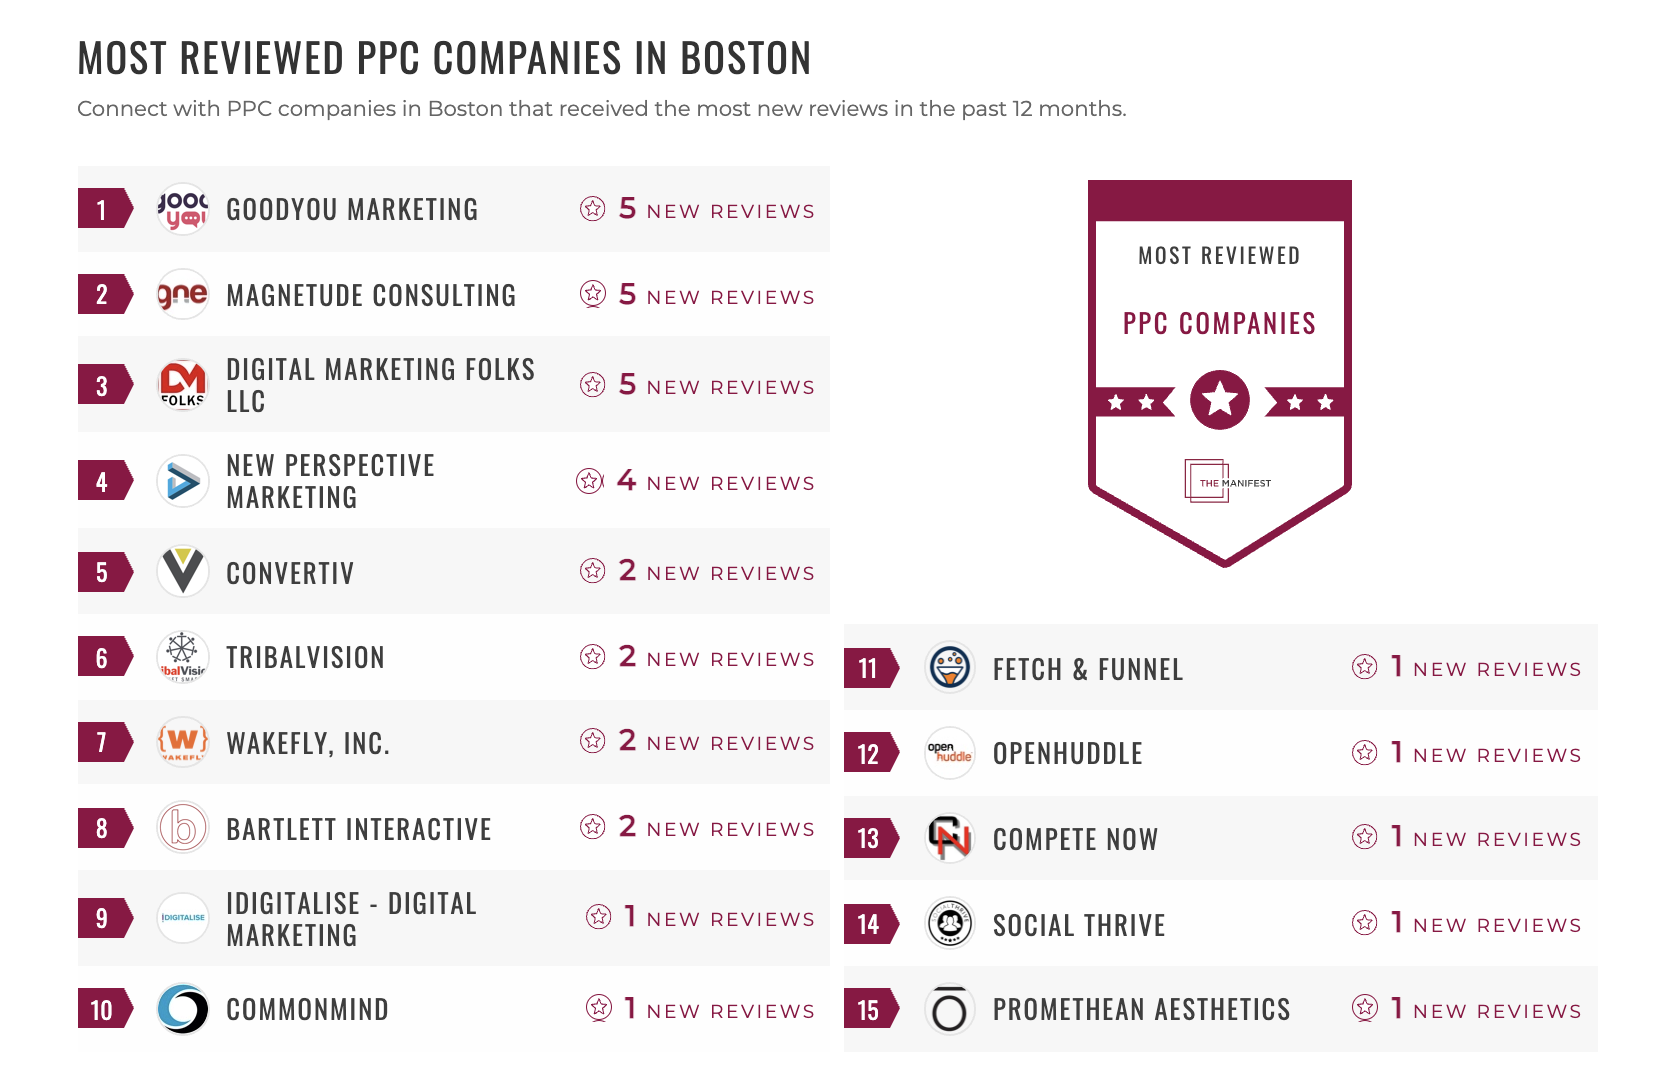 Most Reviewed PPC Companies in Boston